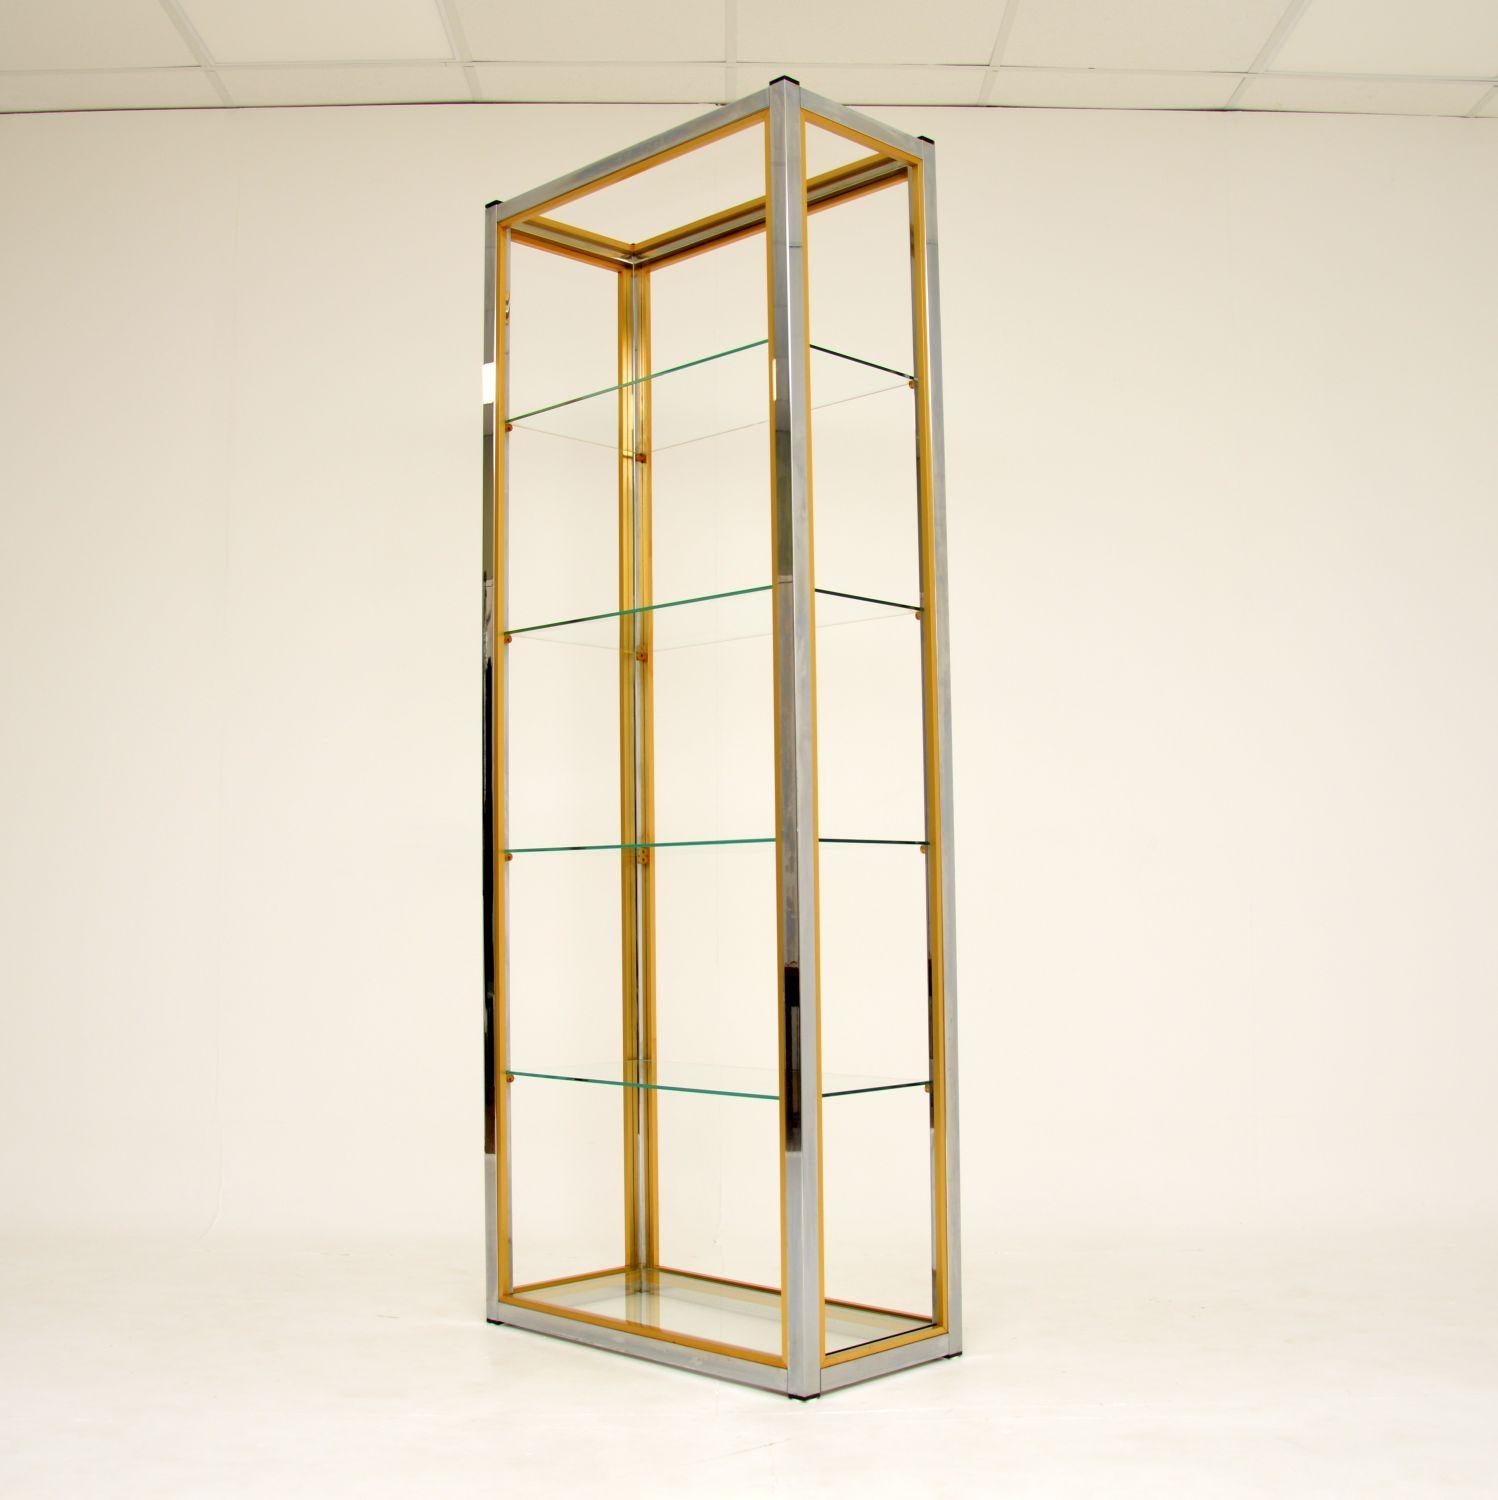 A stunning vintage Italian shelving unit in chrome and glass. This was designed by Renato Zevi for Zevi, it was made in Italy in the 1970’s.

The quality is fantastic, this is a very useful size and is finished all sides, so can be used as a free